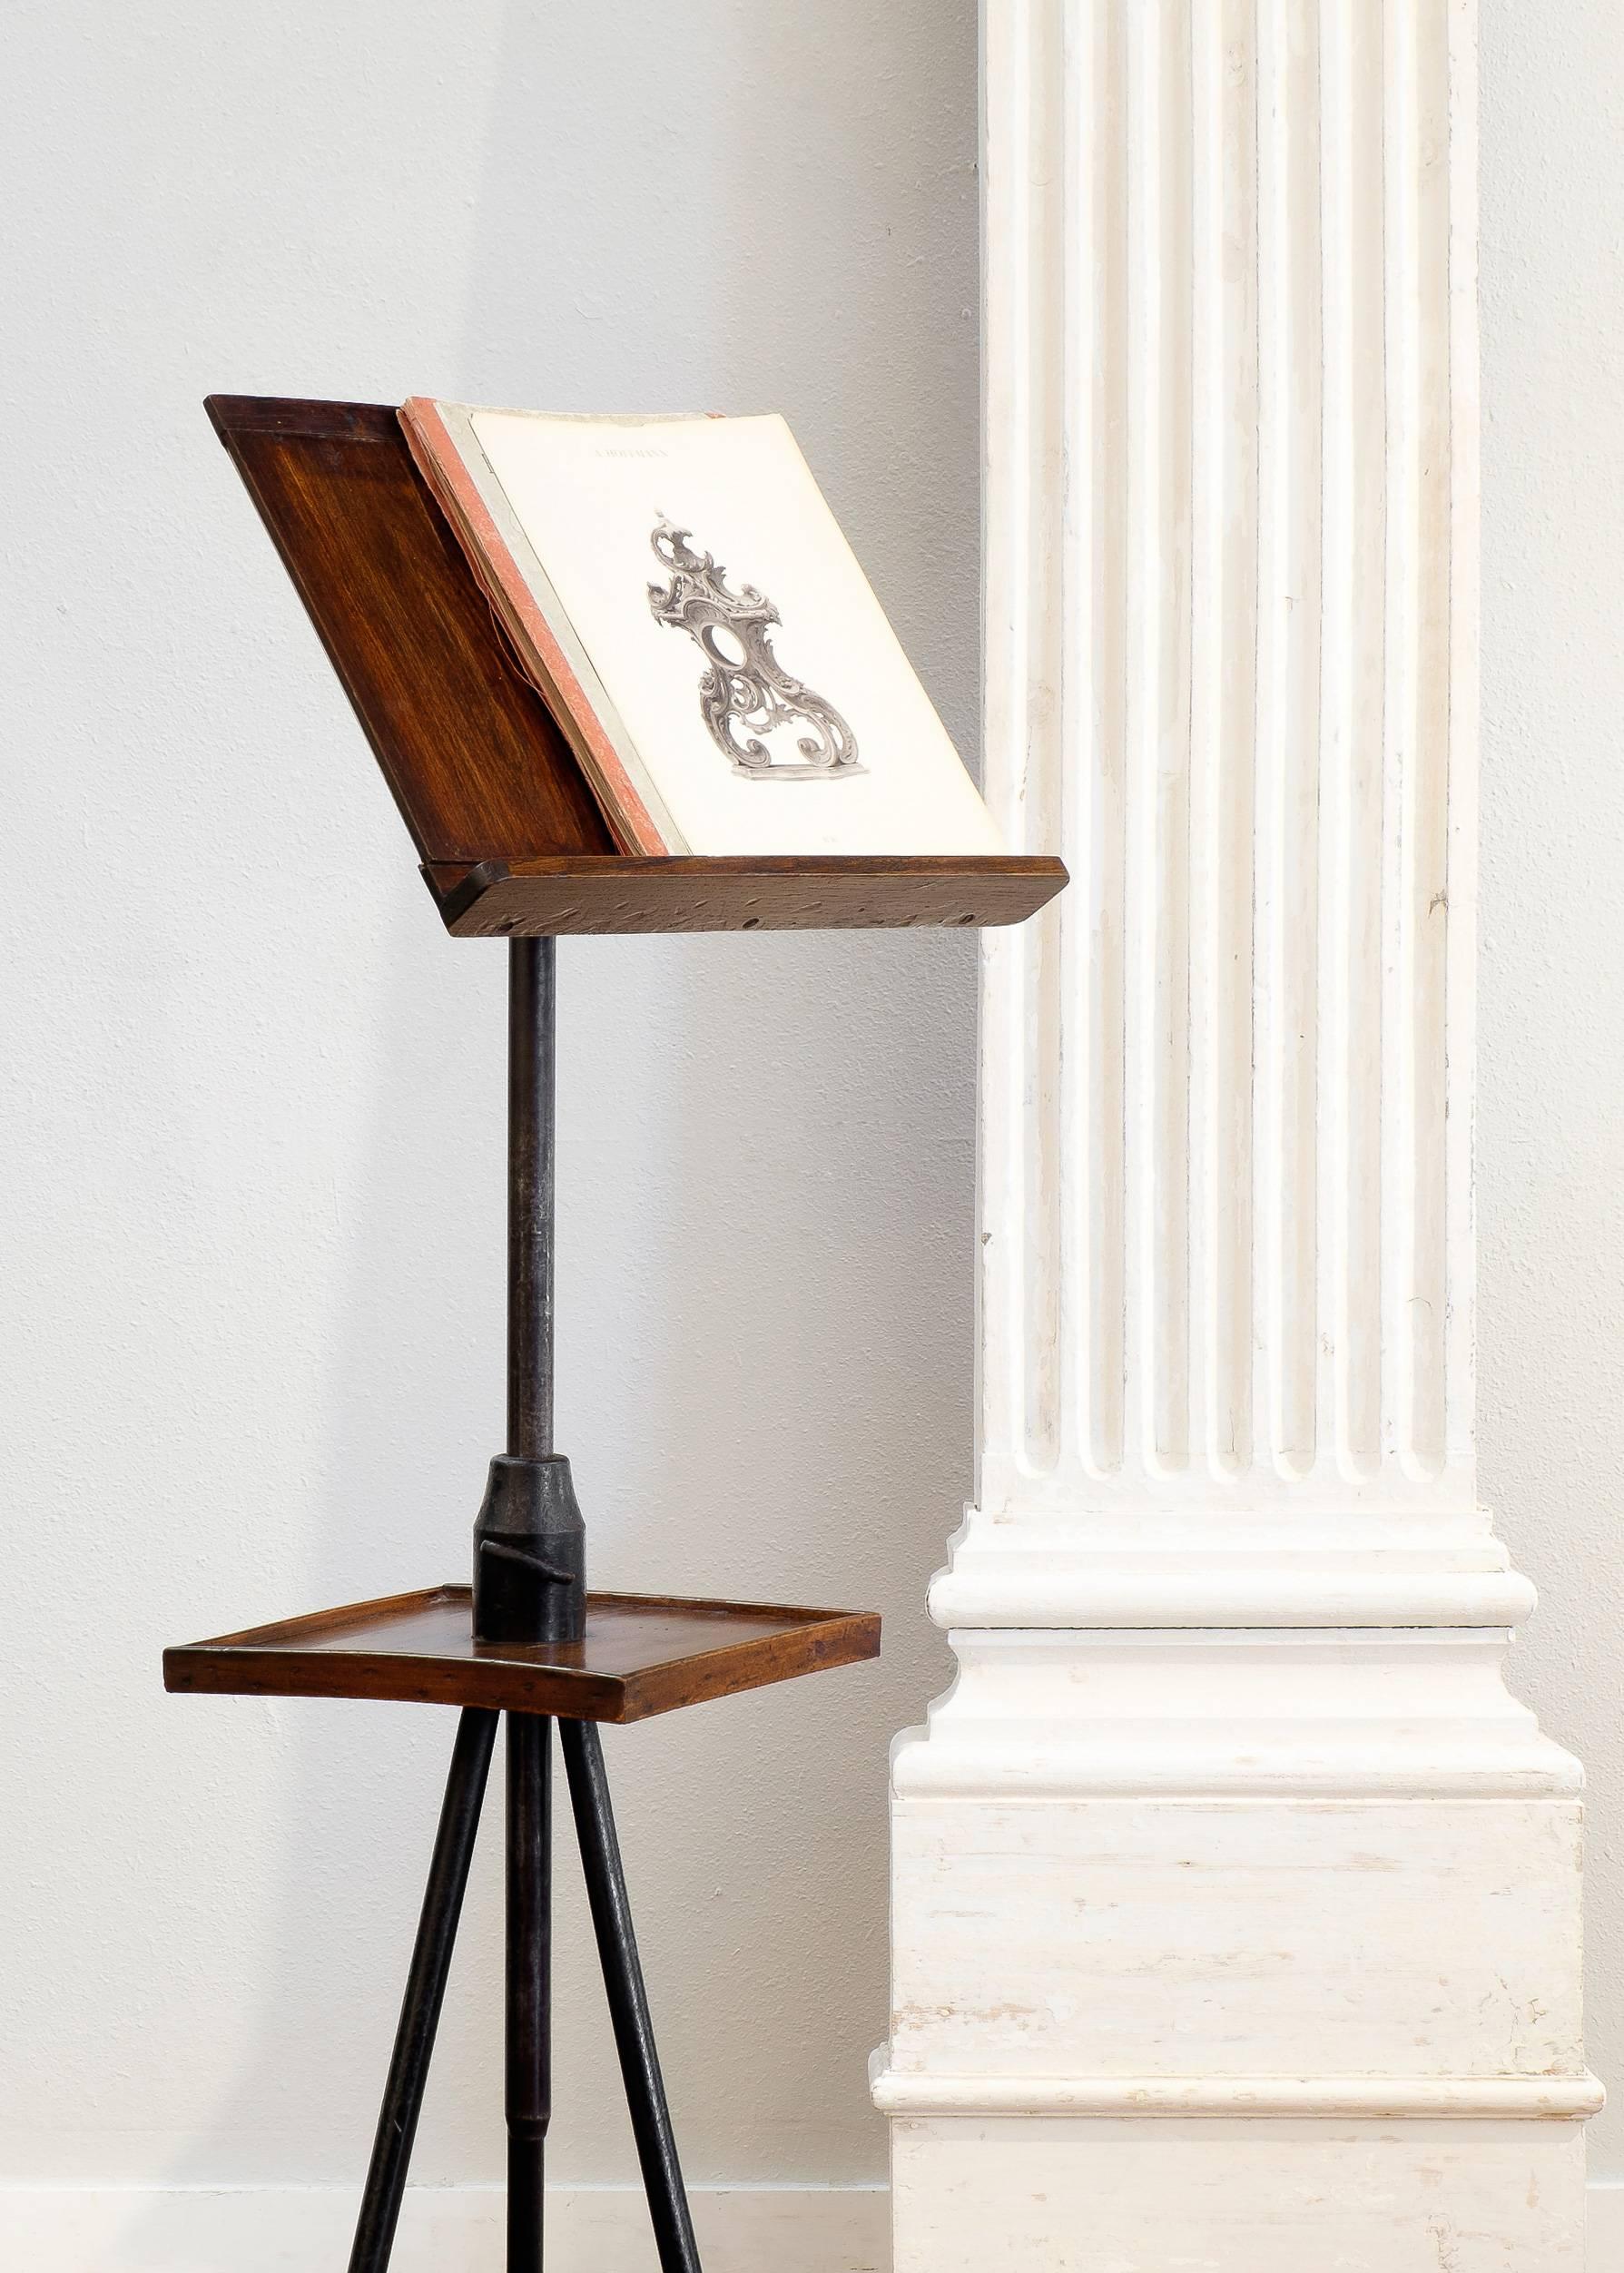 French antique lectern of cast iron with solid oak sand and shelf, adjustable height and inclination cast iron system. This unique, custom piece could be used as a music stand as well.